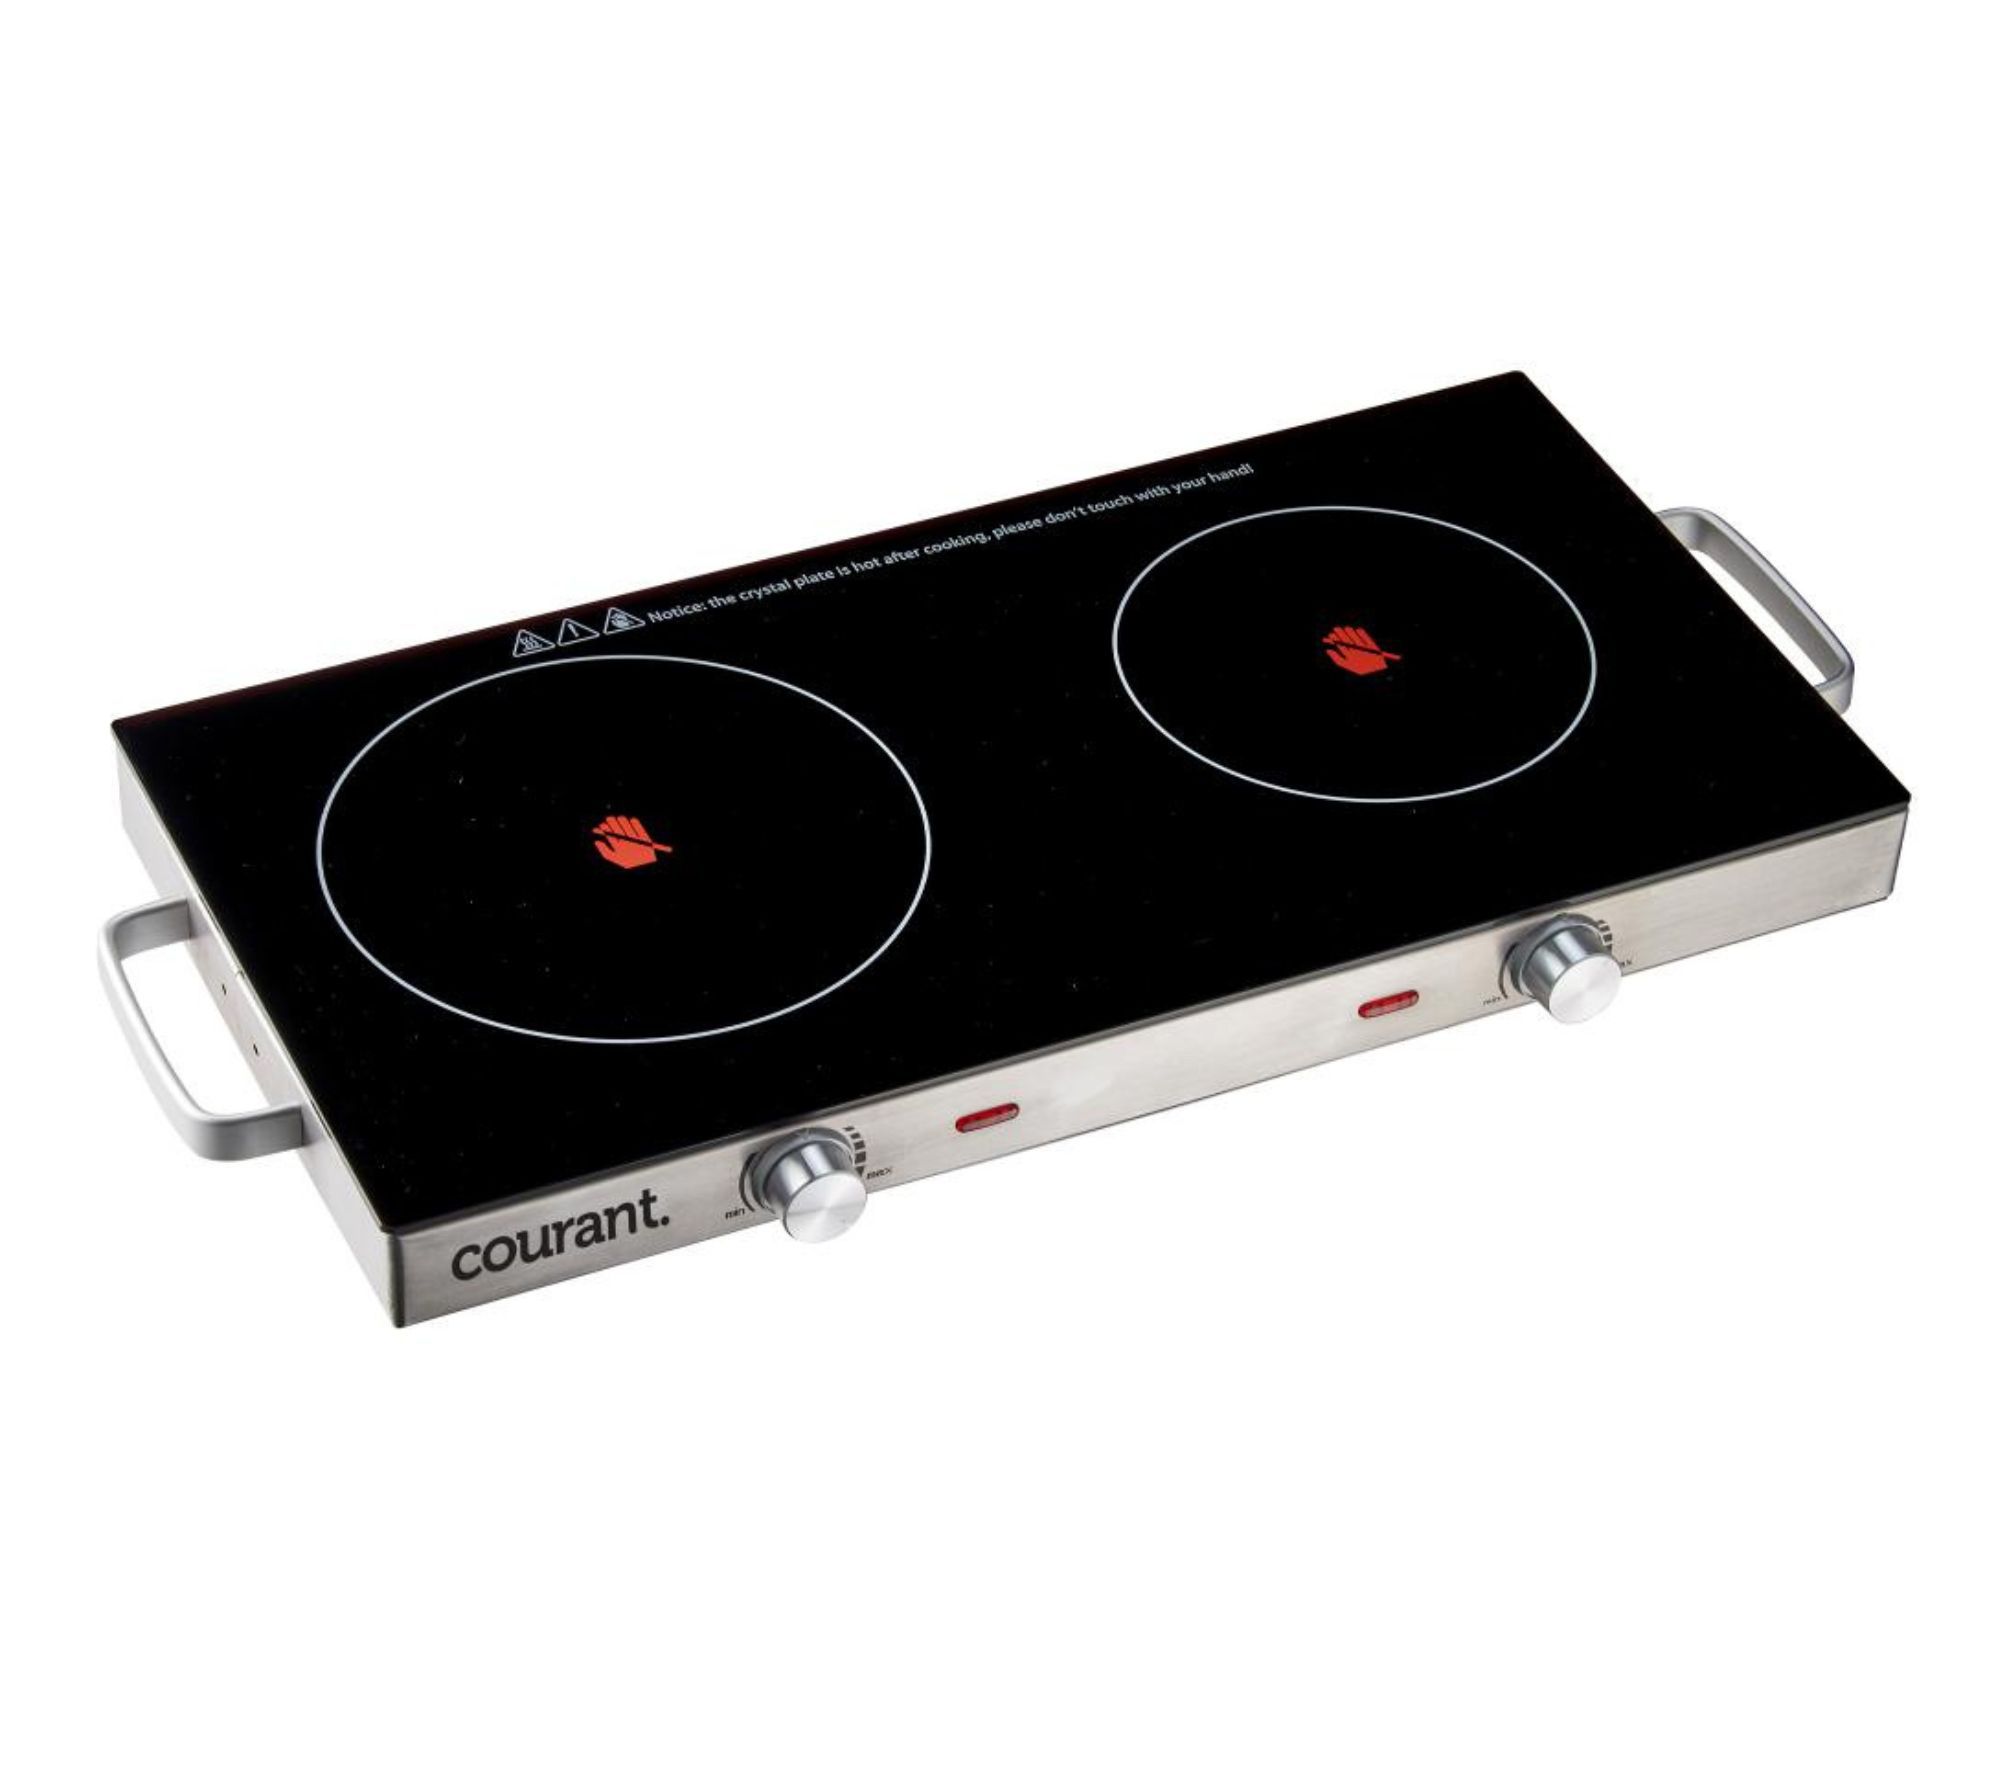 1800W Stainless Steel Infrared Cooktop with Non-slipping Feet and